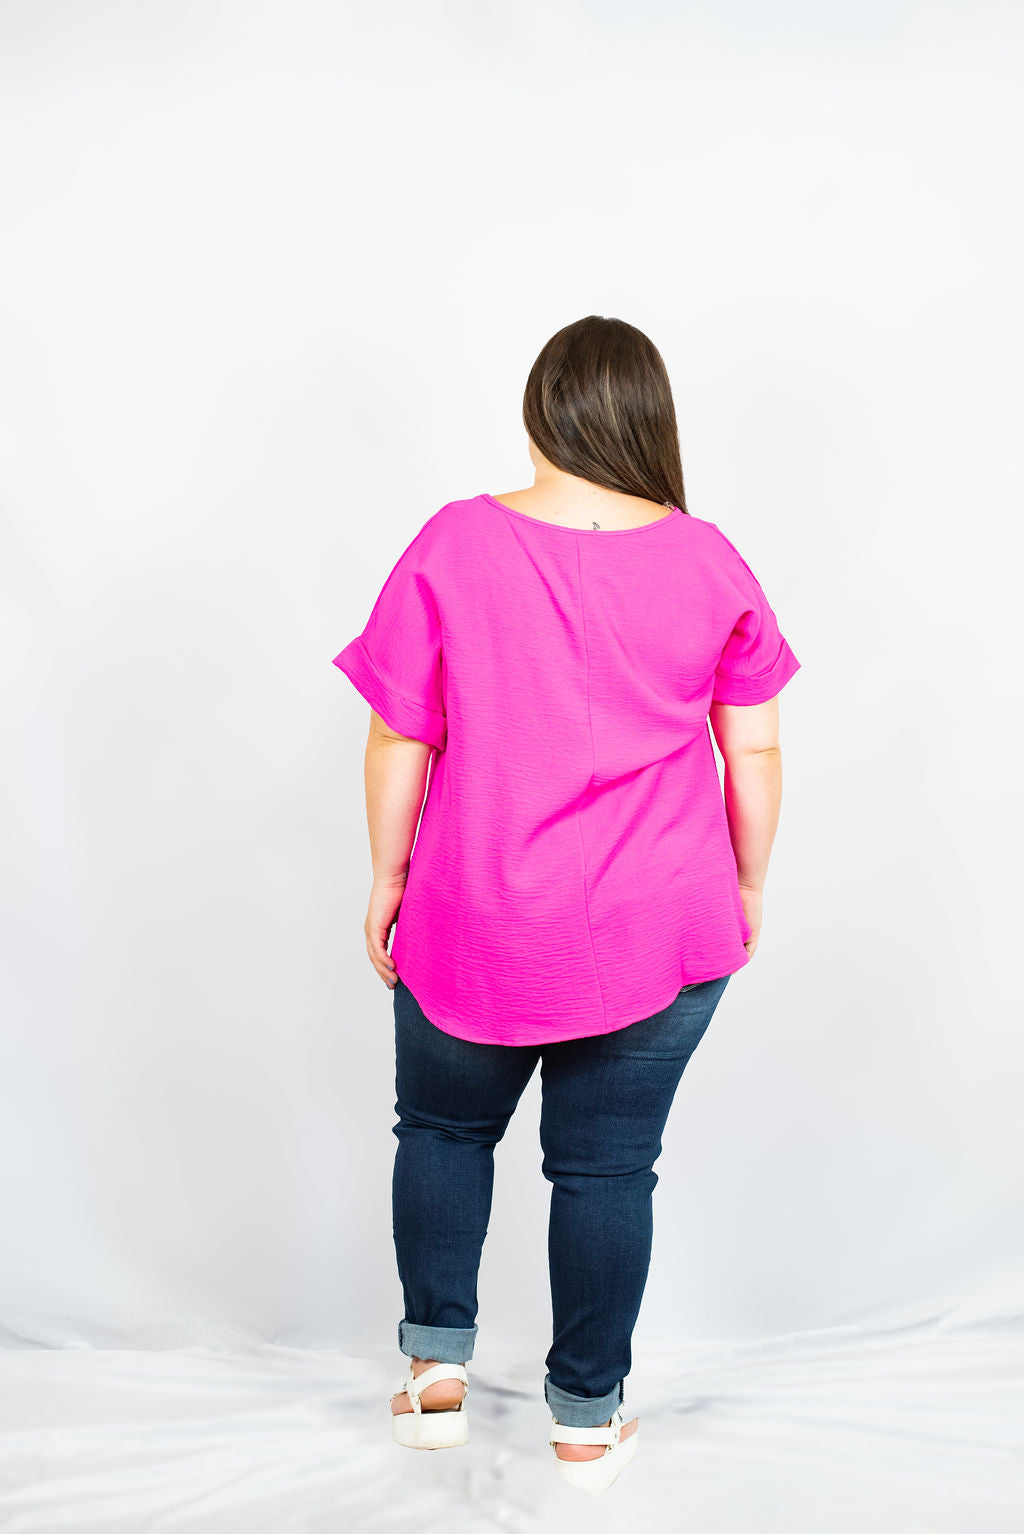 Scooped Neck Top with Rolled Sleeves in Plus by Entro